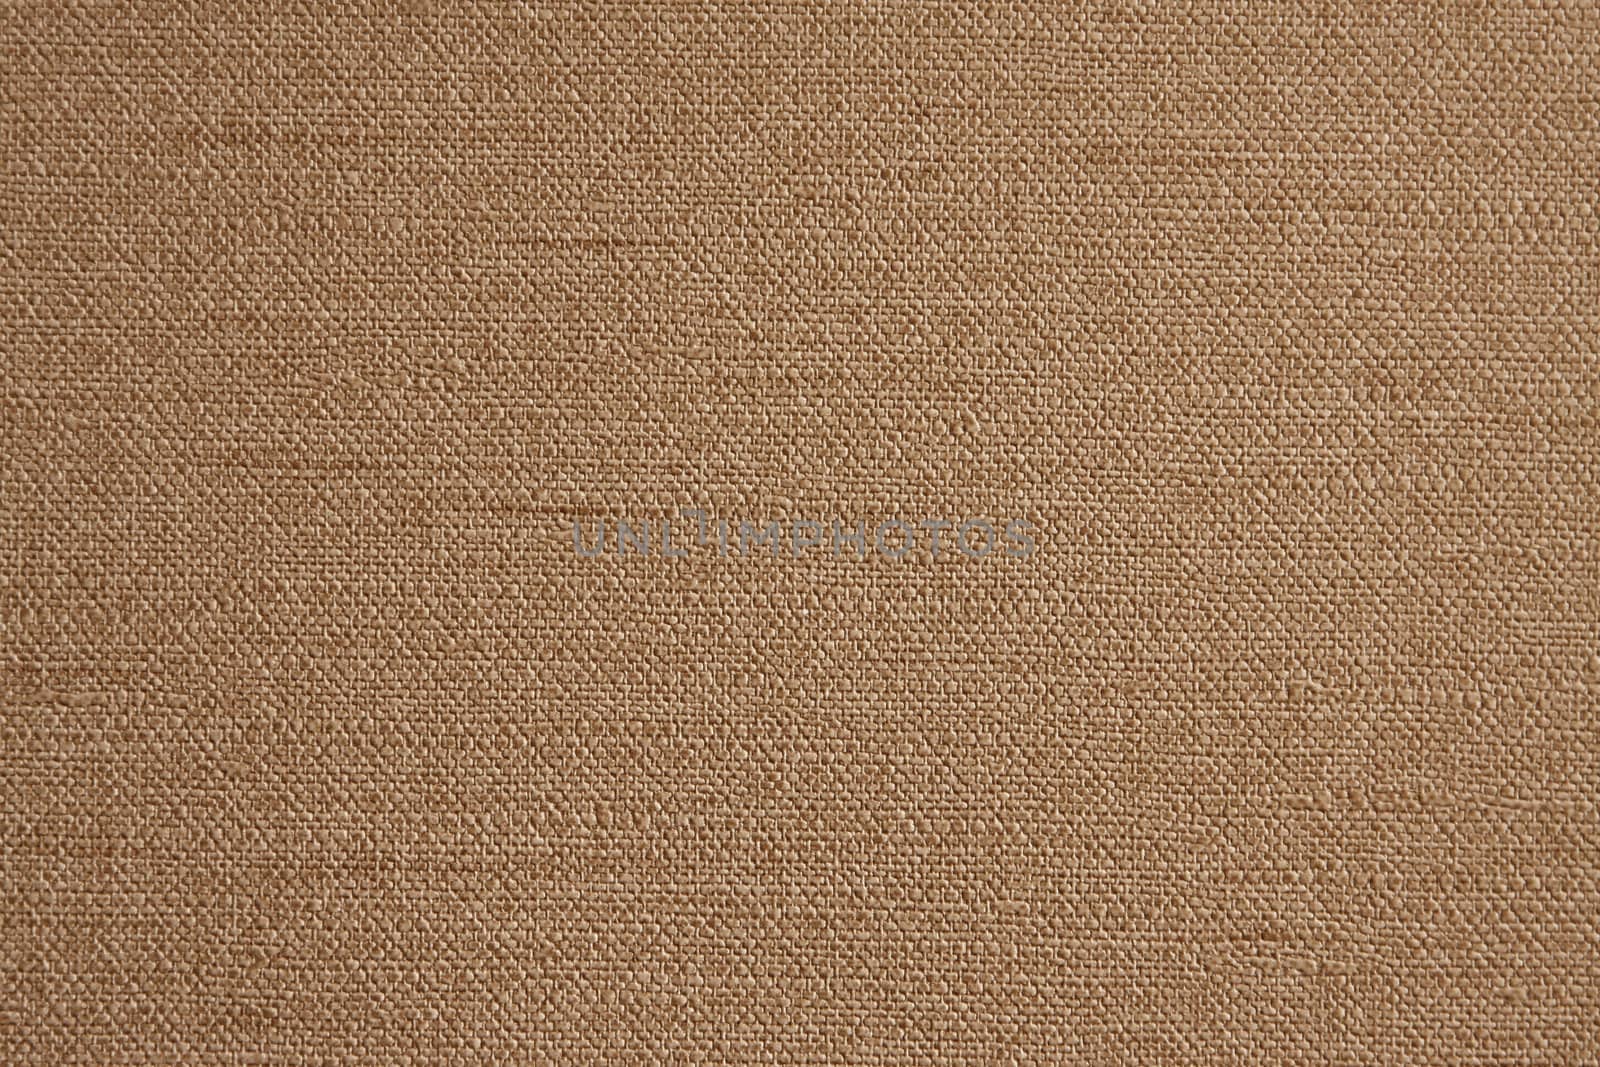 Abstract background in raw natural brown